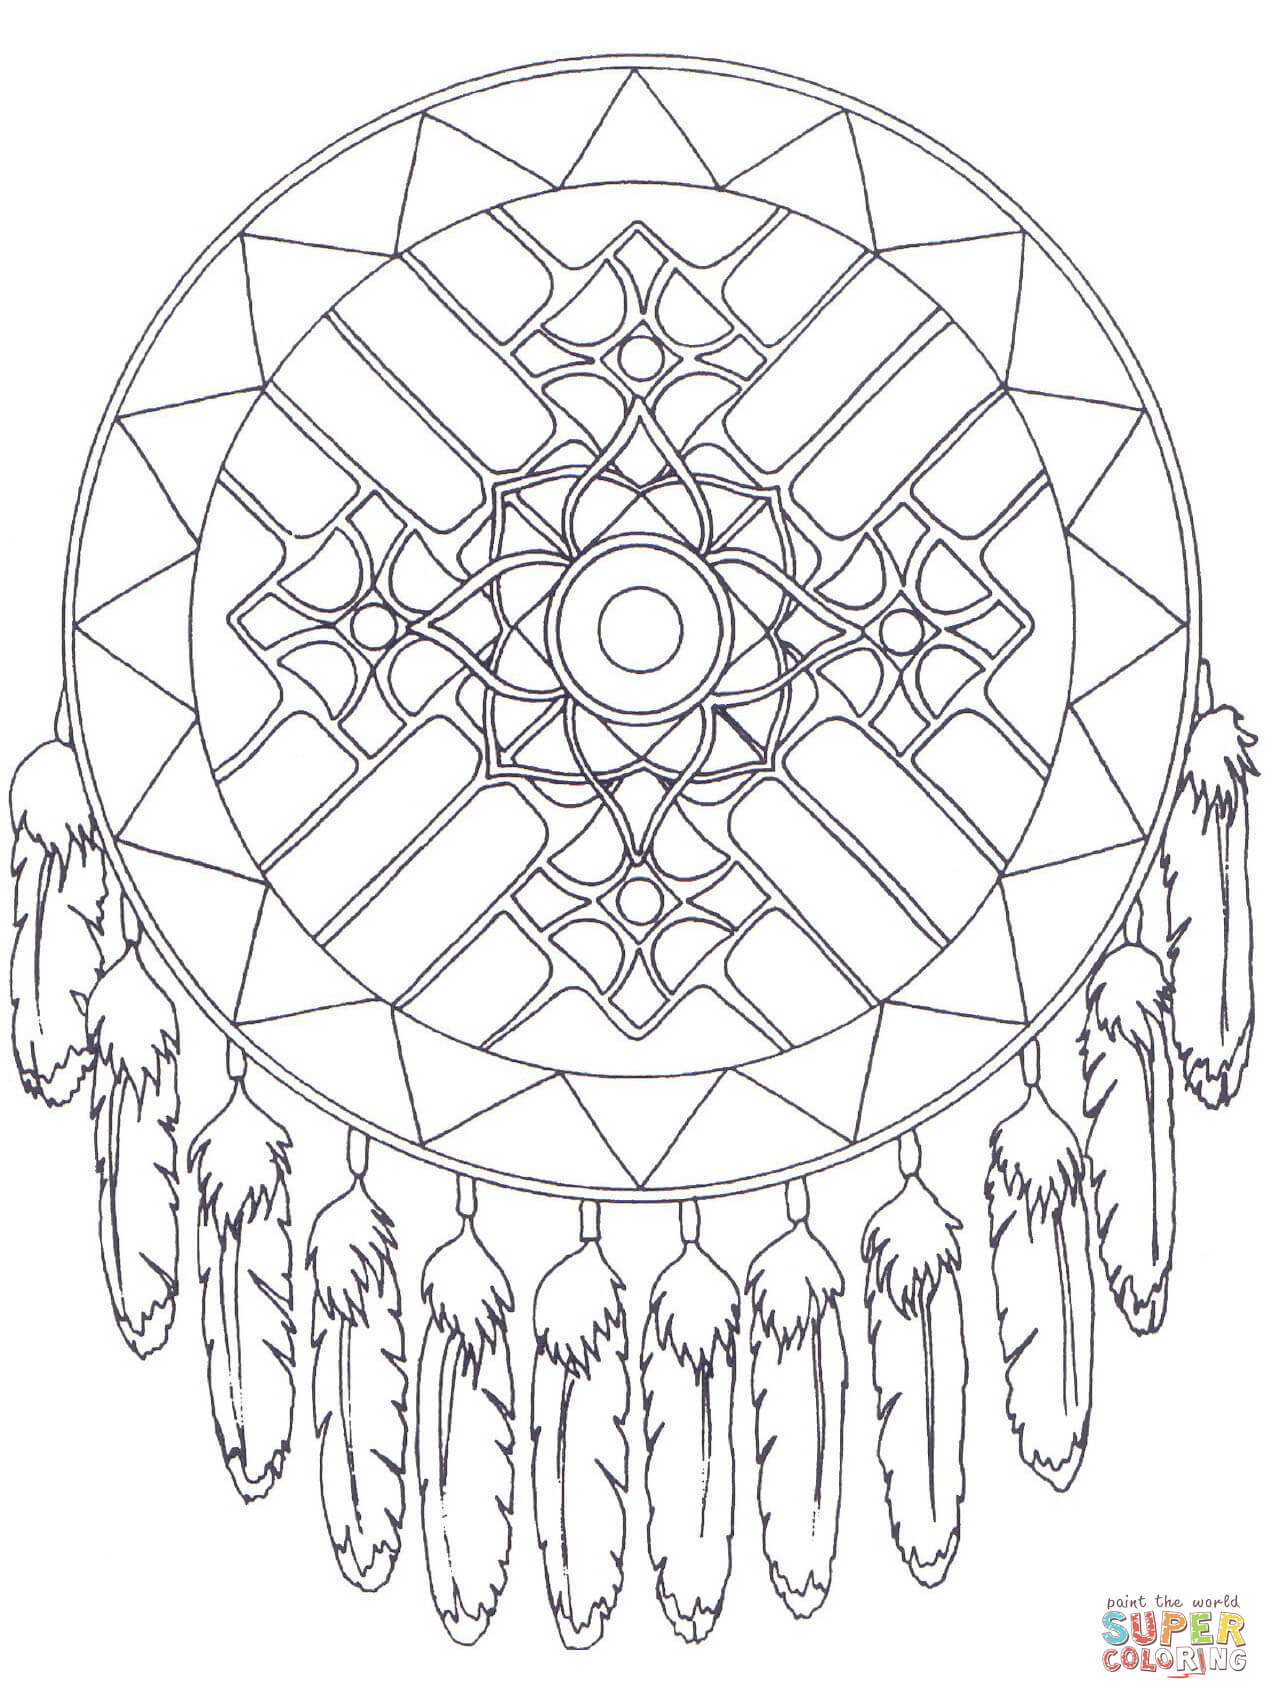 Native American Designs Coloring Pages Printables - Coloring Home